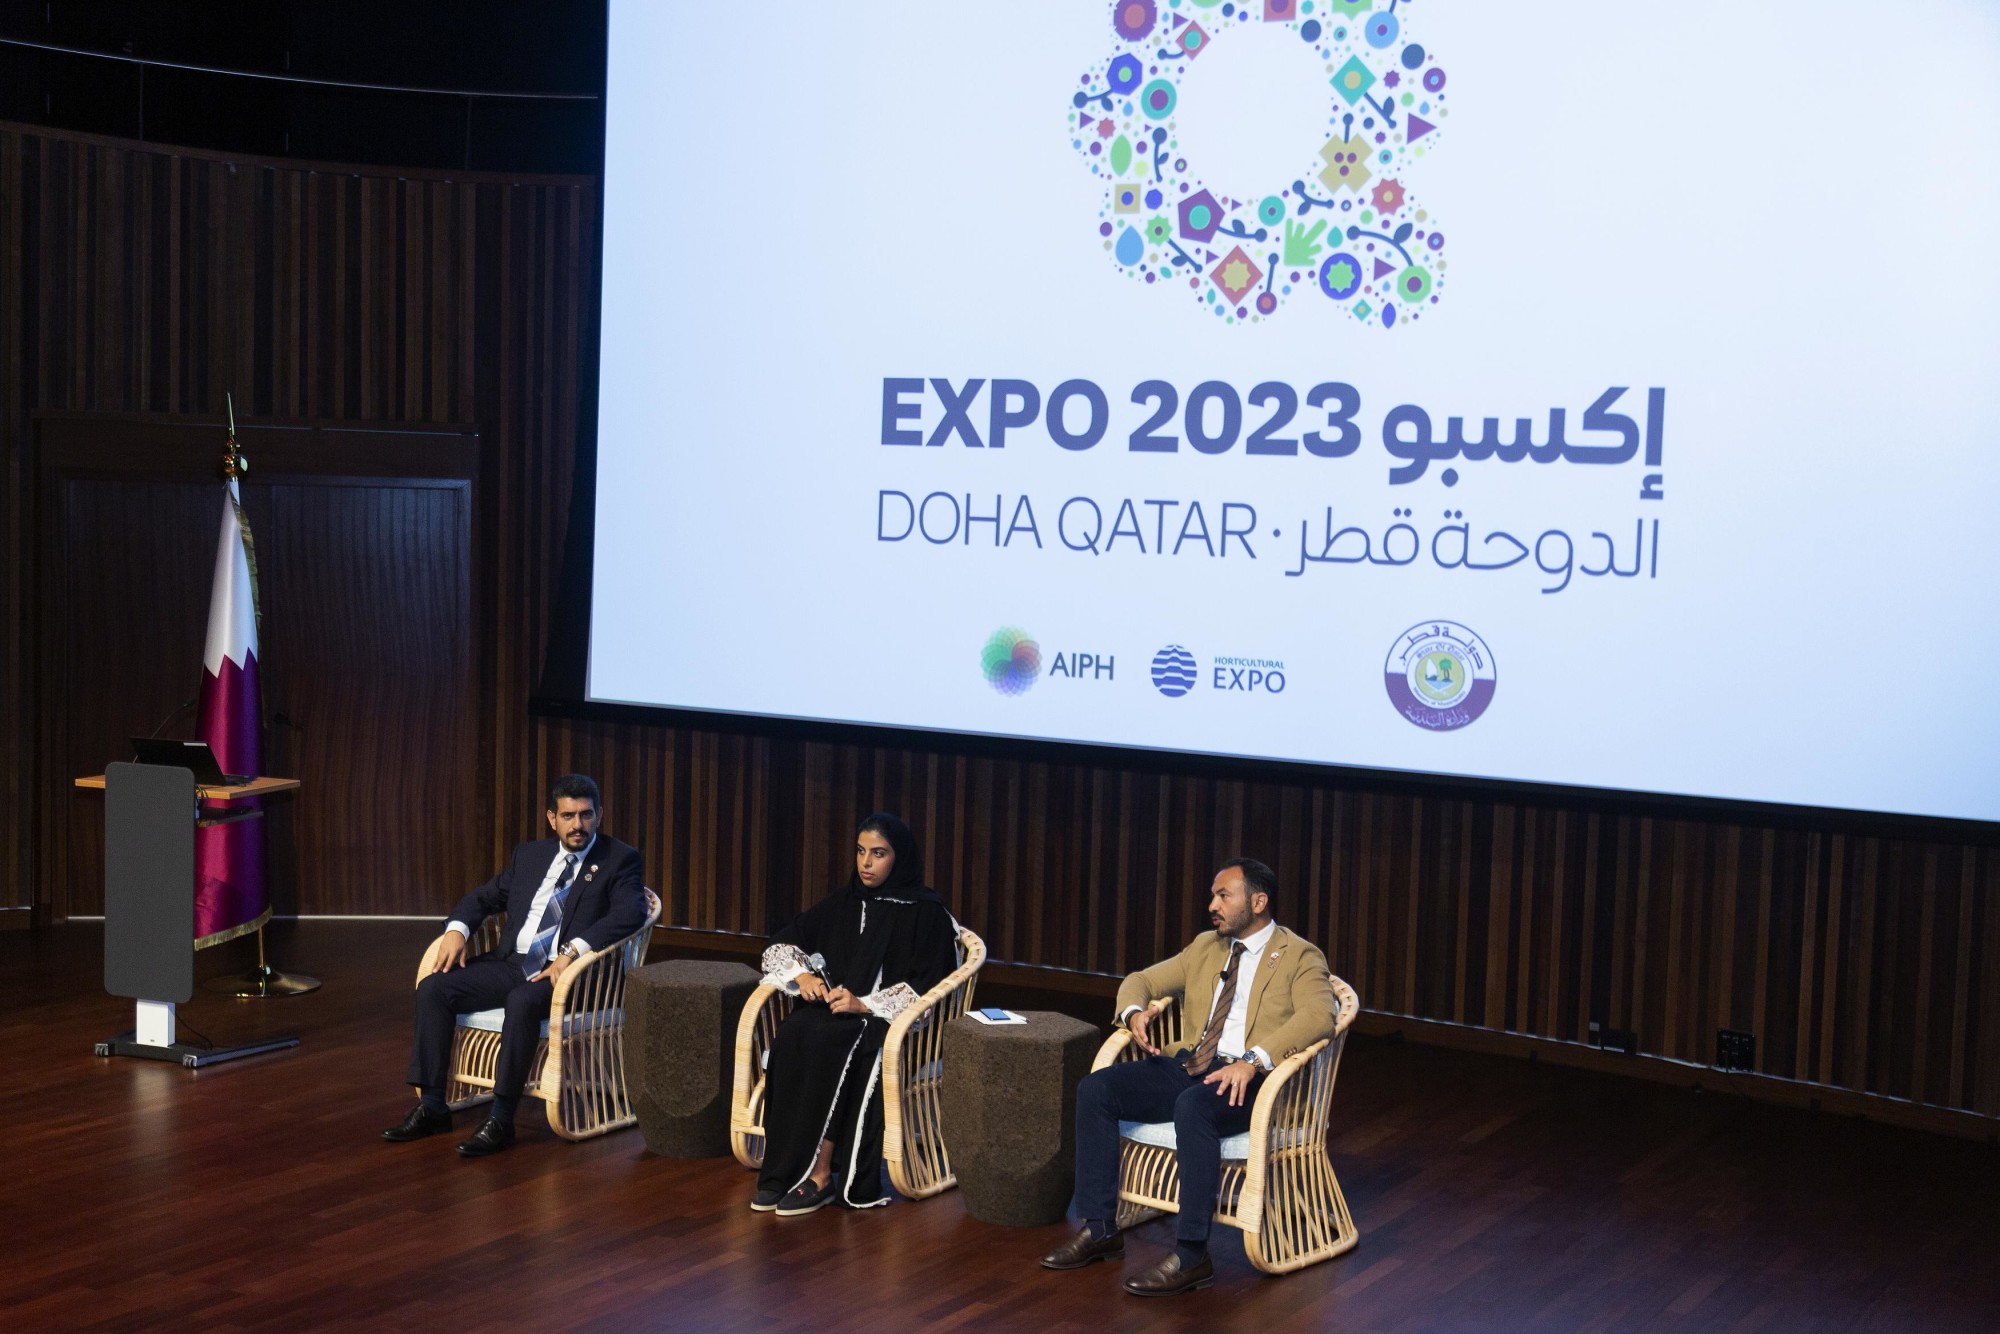 Roland Elfeghaly, Design Manager of Expo 2023 Doha, Fatma Al-Abdulmalek, Site Development Manager of Expo 2023 Doha and Mohamed El-Alaily, Program Manager of Expo 2023 Doha during Expo 2023 Doha, Qatar Horticultural launch event at Terra the